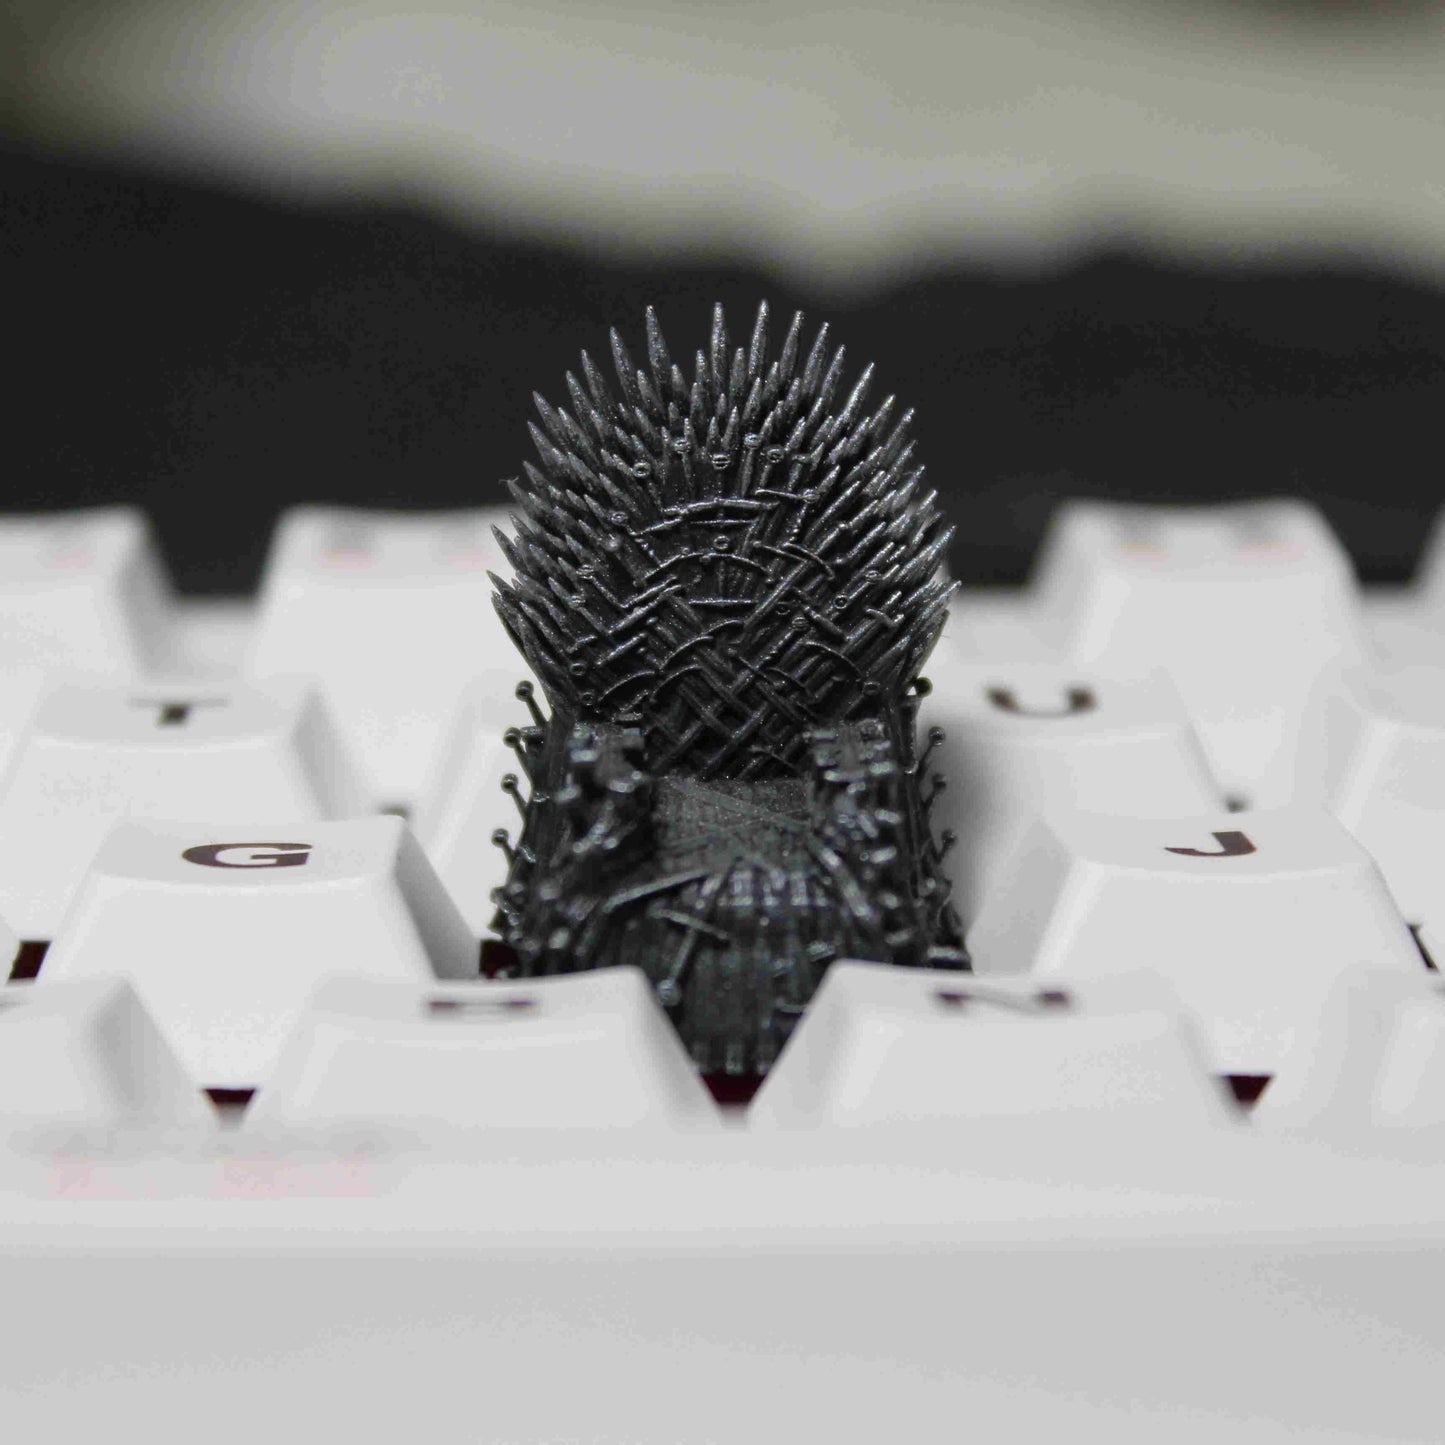 Game of Thrones Artisan Keycaps Iron Throne Keycap for Mechanical Keyboard 🏰 Step into Westeros: Immerse yourself in the epic world of Game of Thrones with AiheyStudio's Iron Throne Artisan Keycaps. Crafted for fans, these keycaps bring the grandeur of the Iron Throne to your fingertips.